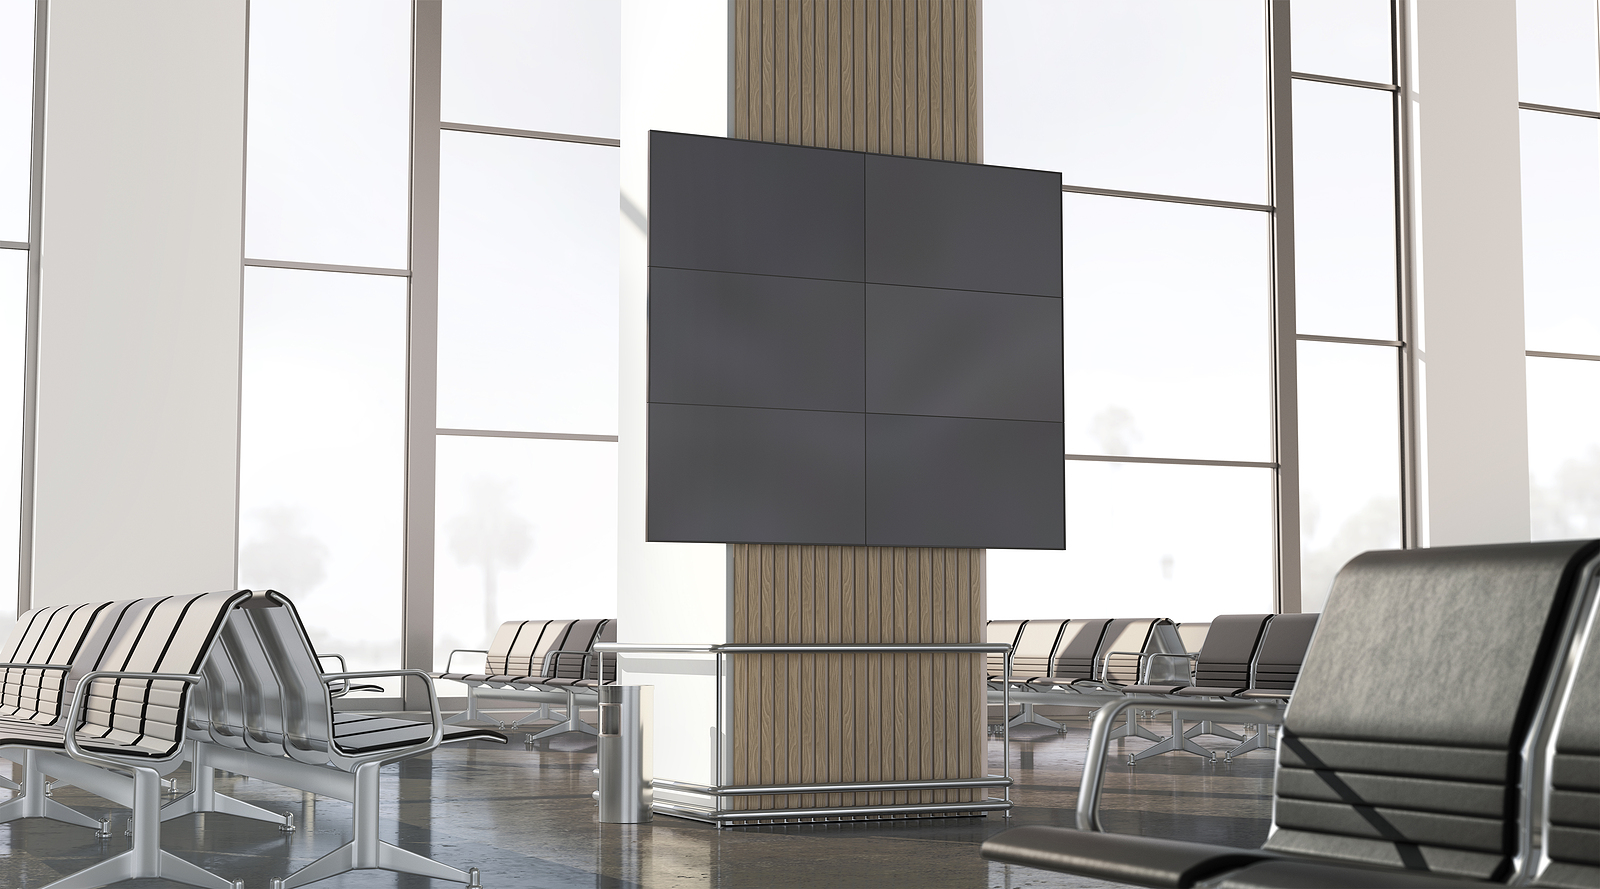 Blank Black Led Display In Airport Lounge Mockup, Side View, 3d